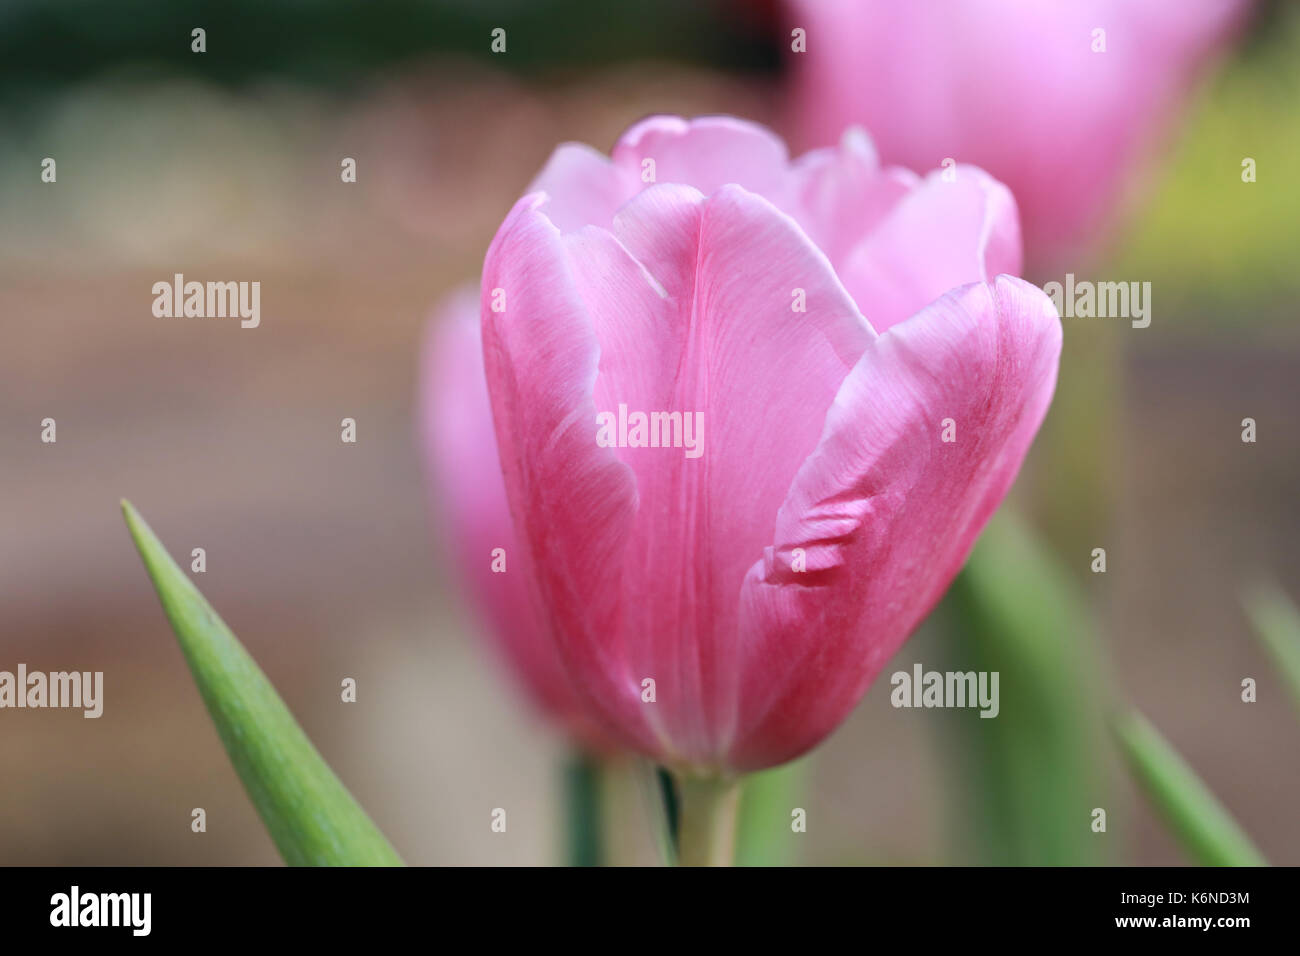 Bright Pink tulips blossoming in the garden. Stock Photo